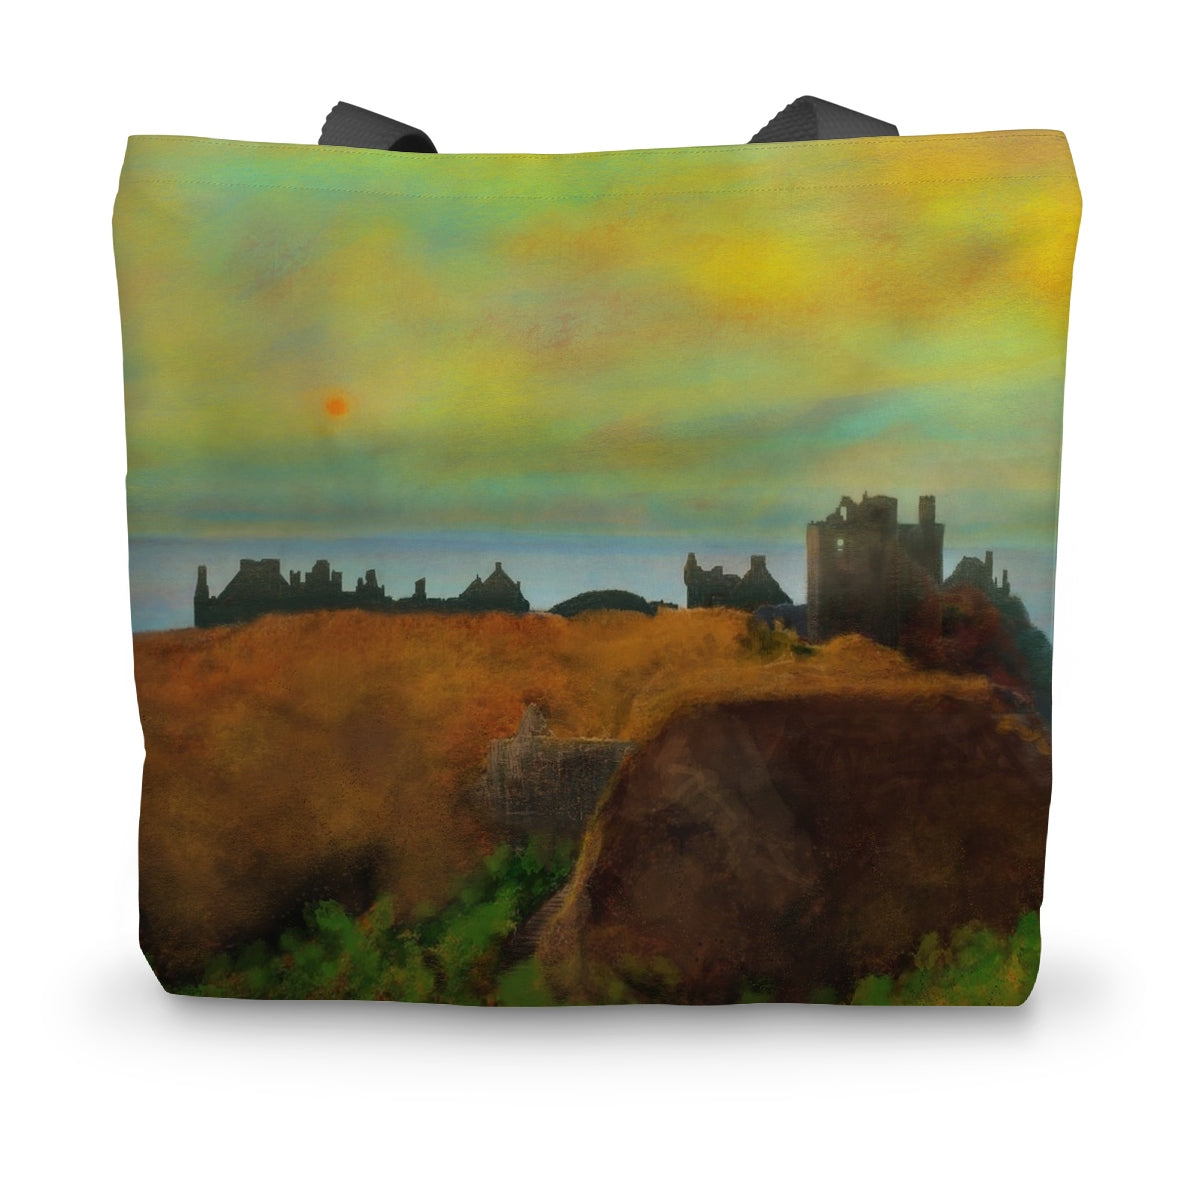 Dunnottar Castle Art Gifts Canvas Tote Bag-Bags-Historic & Iconic Scotland Art Gallery-14"x18.5"-Paintings, Prints, Homeware, Art Gifts From Scotland By Scottish Artist Kevin Hunter